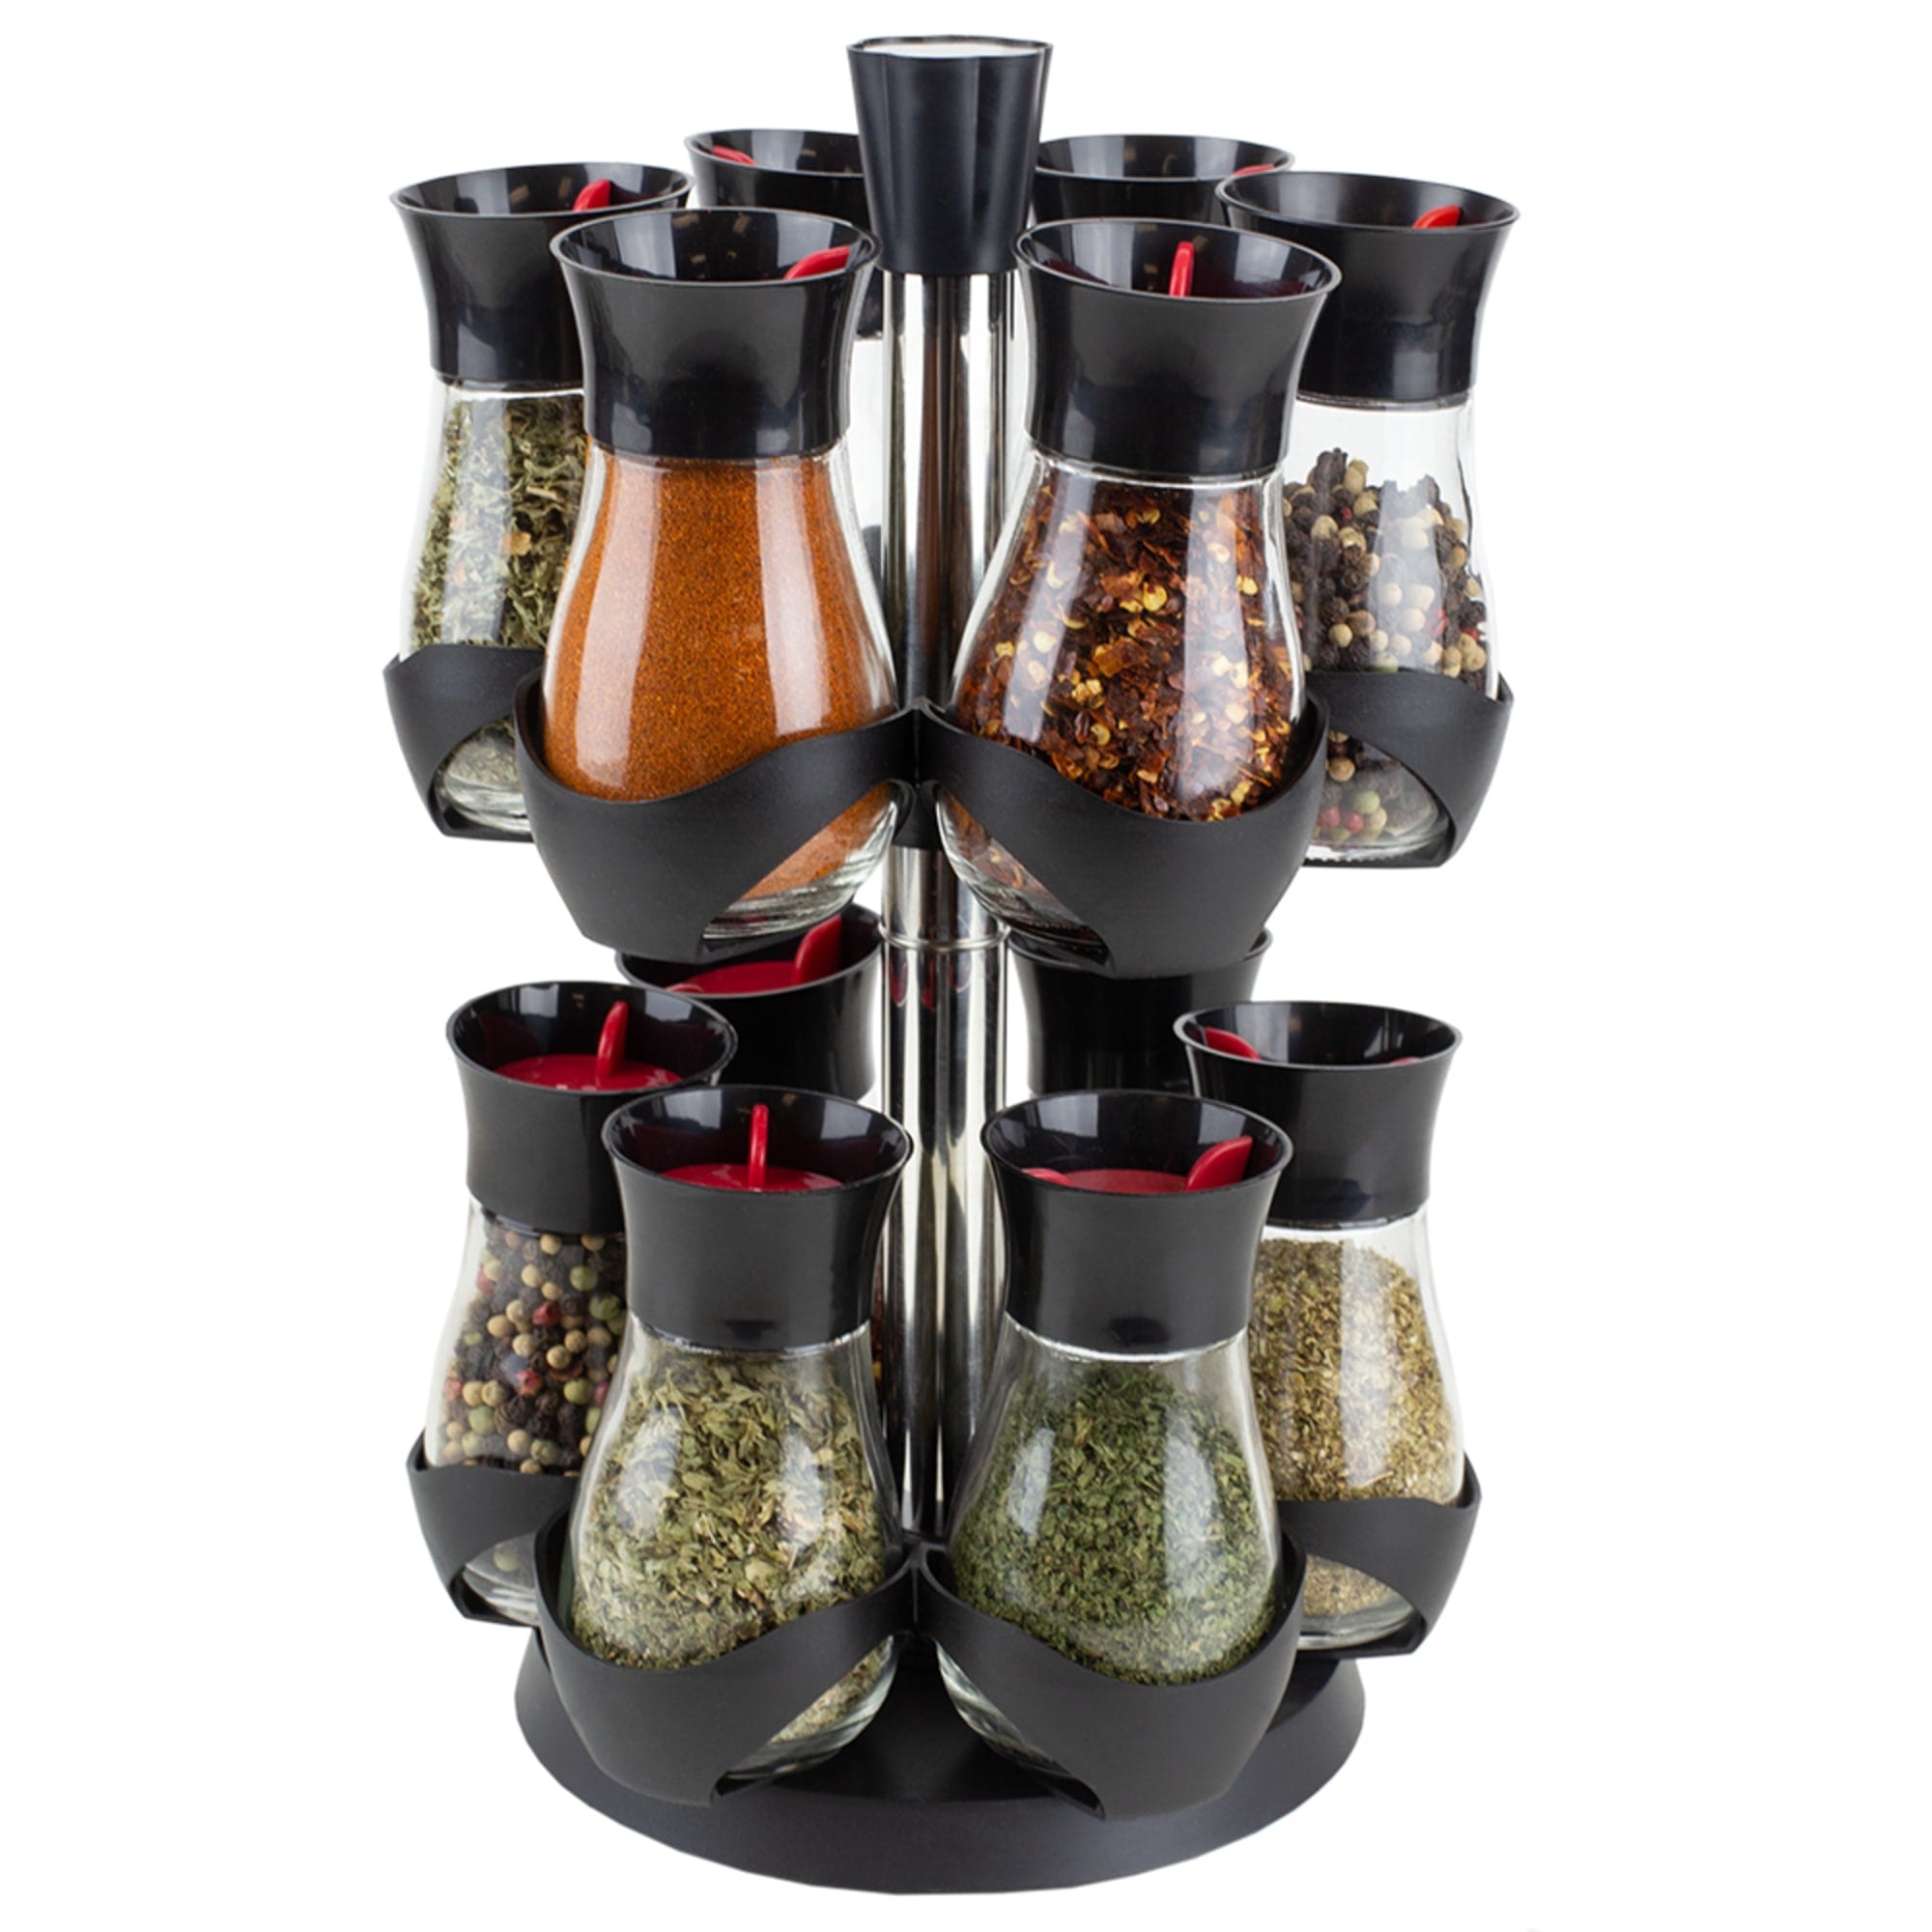 Home Basics Contemporary Gourmet Revolving 12-Jar Two Tier Spice Rack, Black $20.00 EACH, CASE PACK OF 4